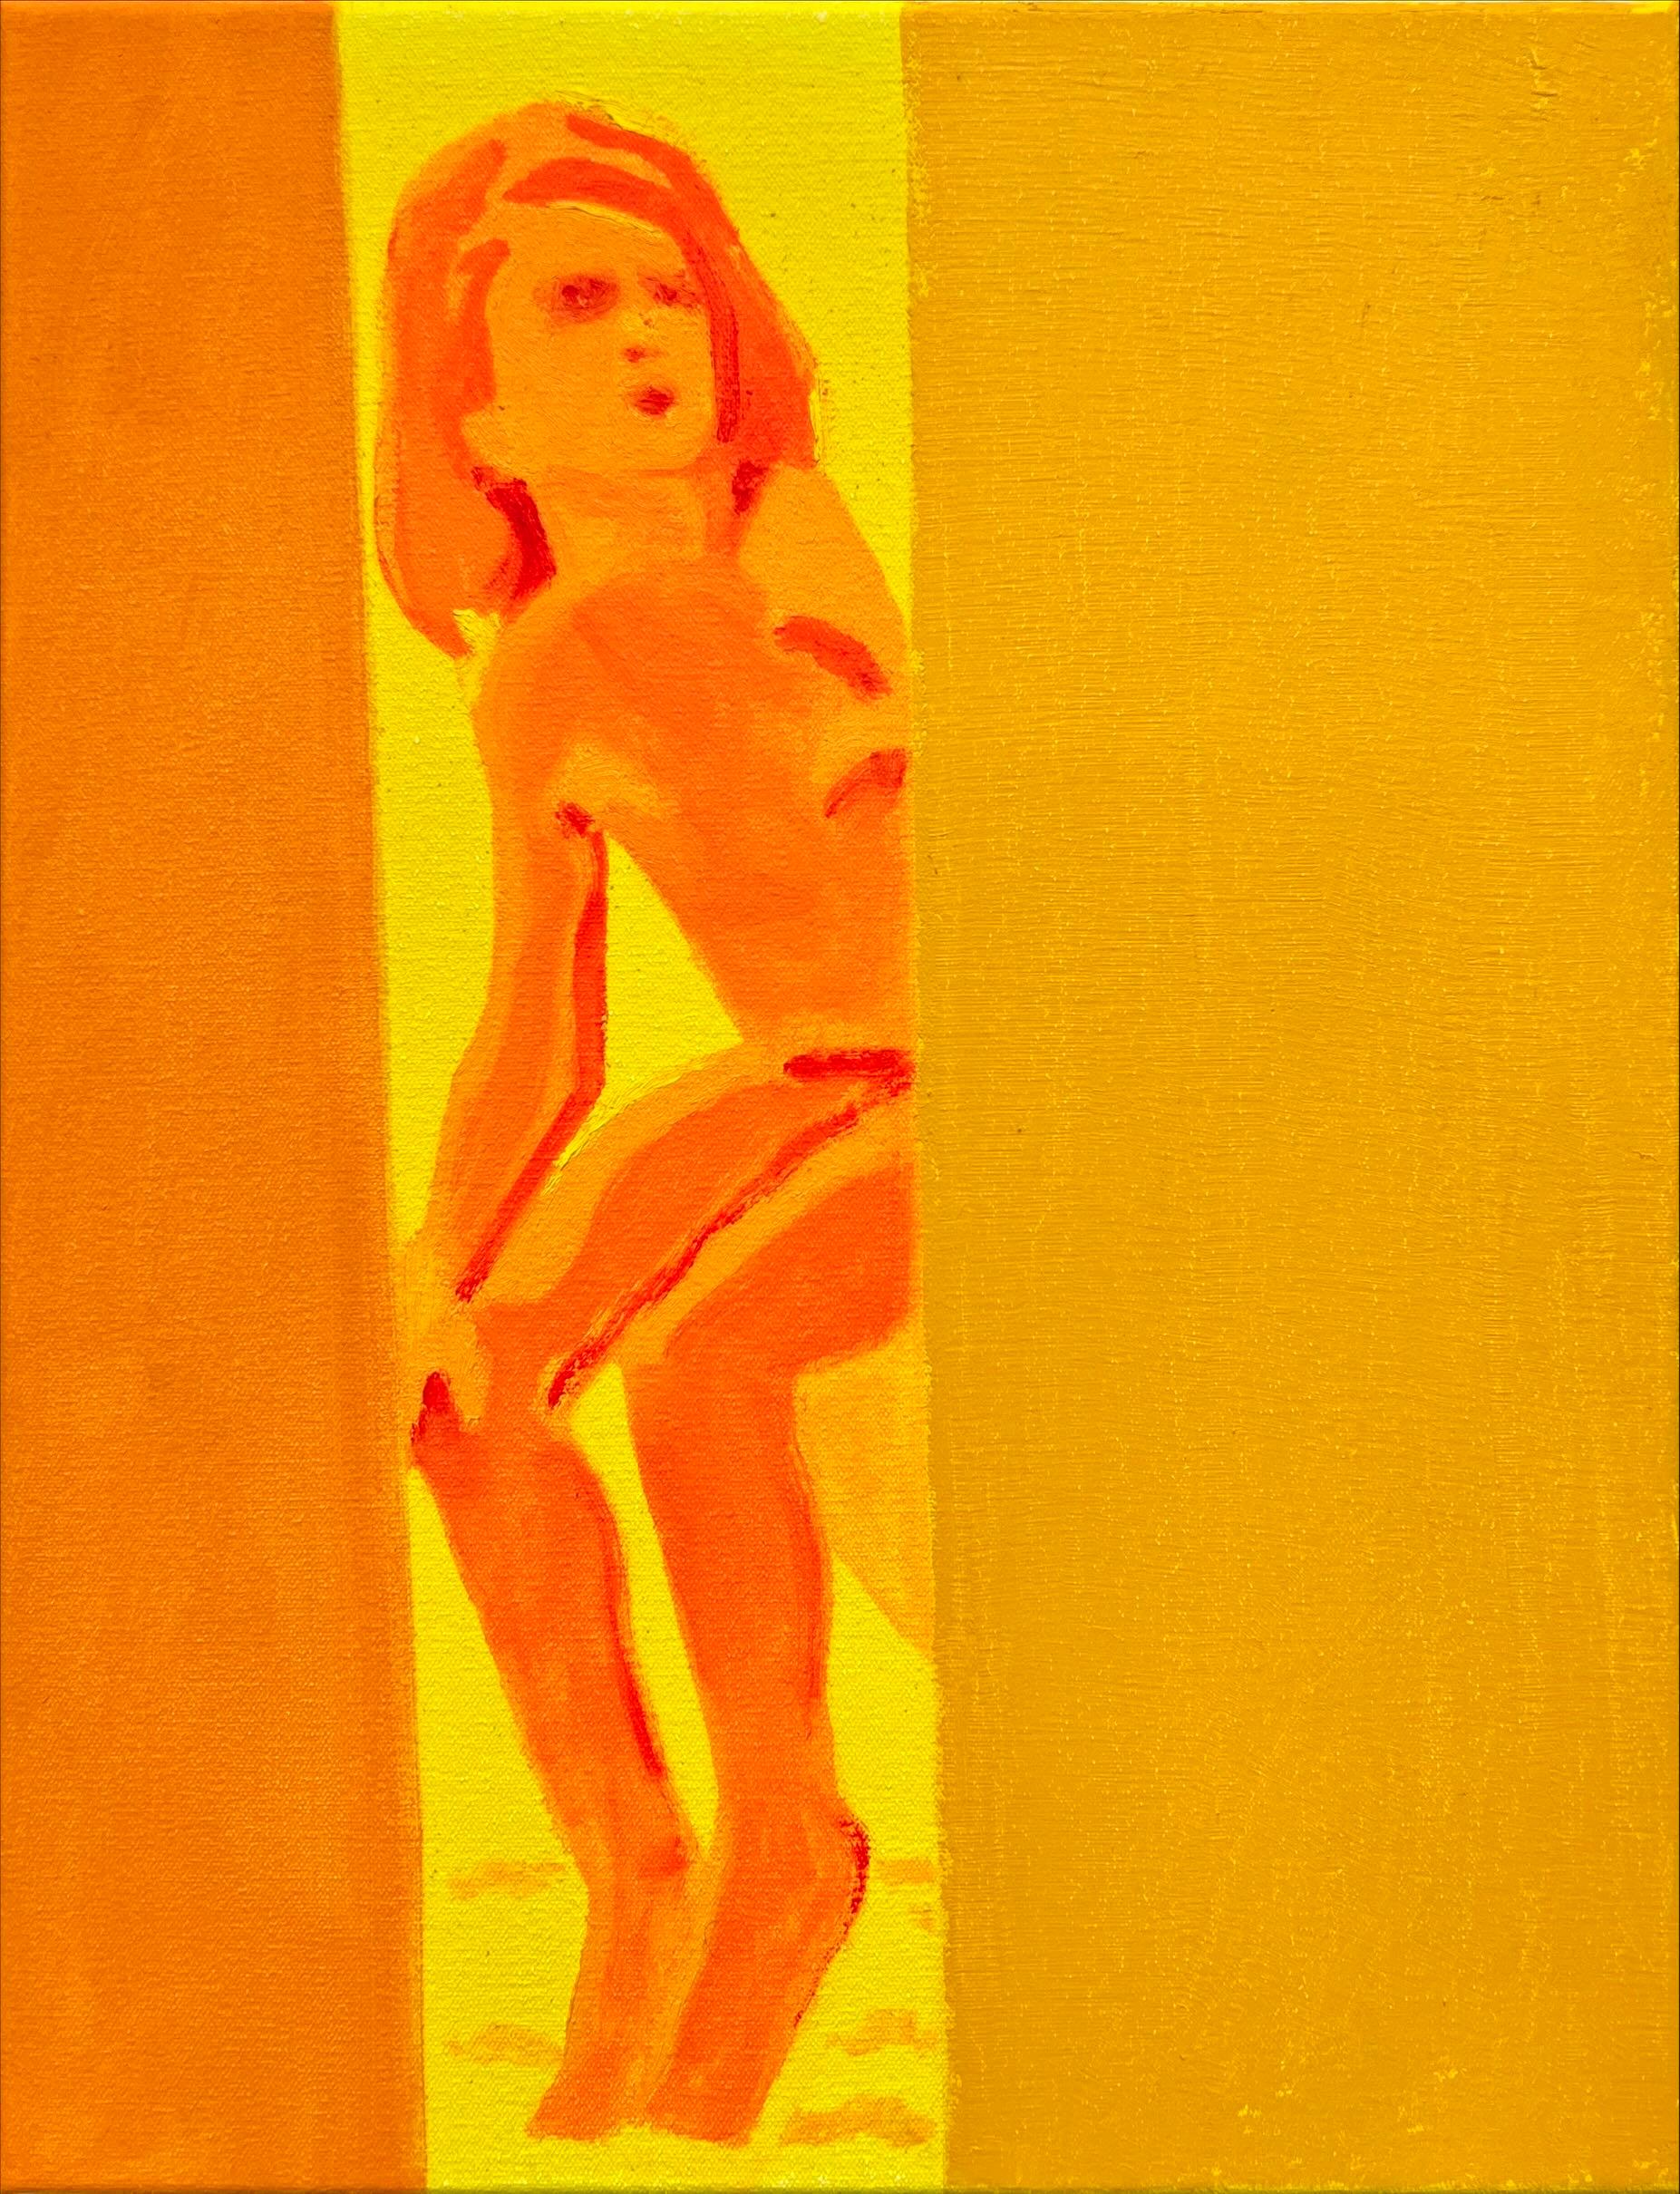 Bradley Kerl Portrait Painting - Glow Girl, Contemporary Oil Painting, Orange, Yellow